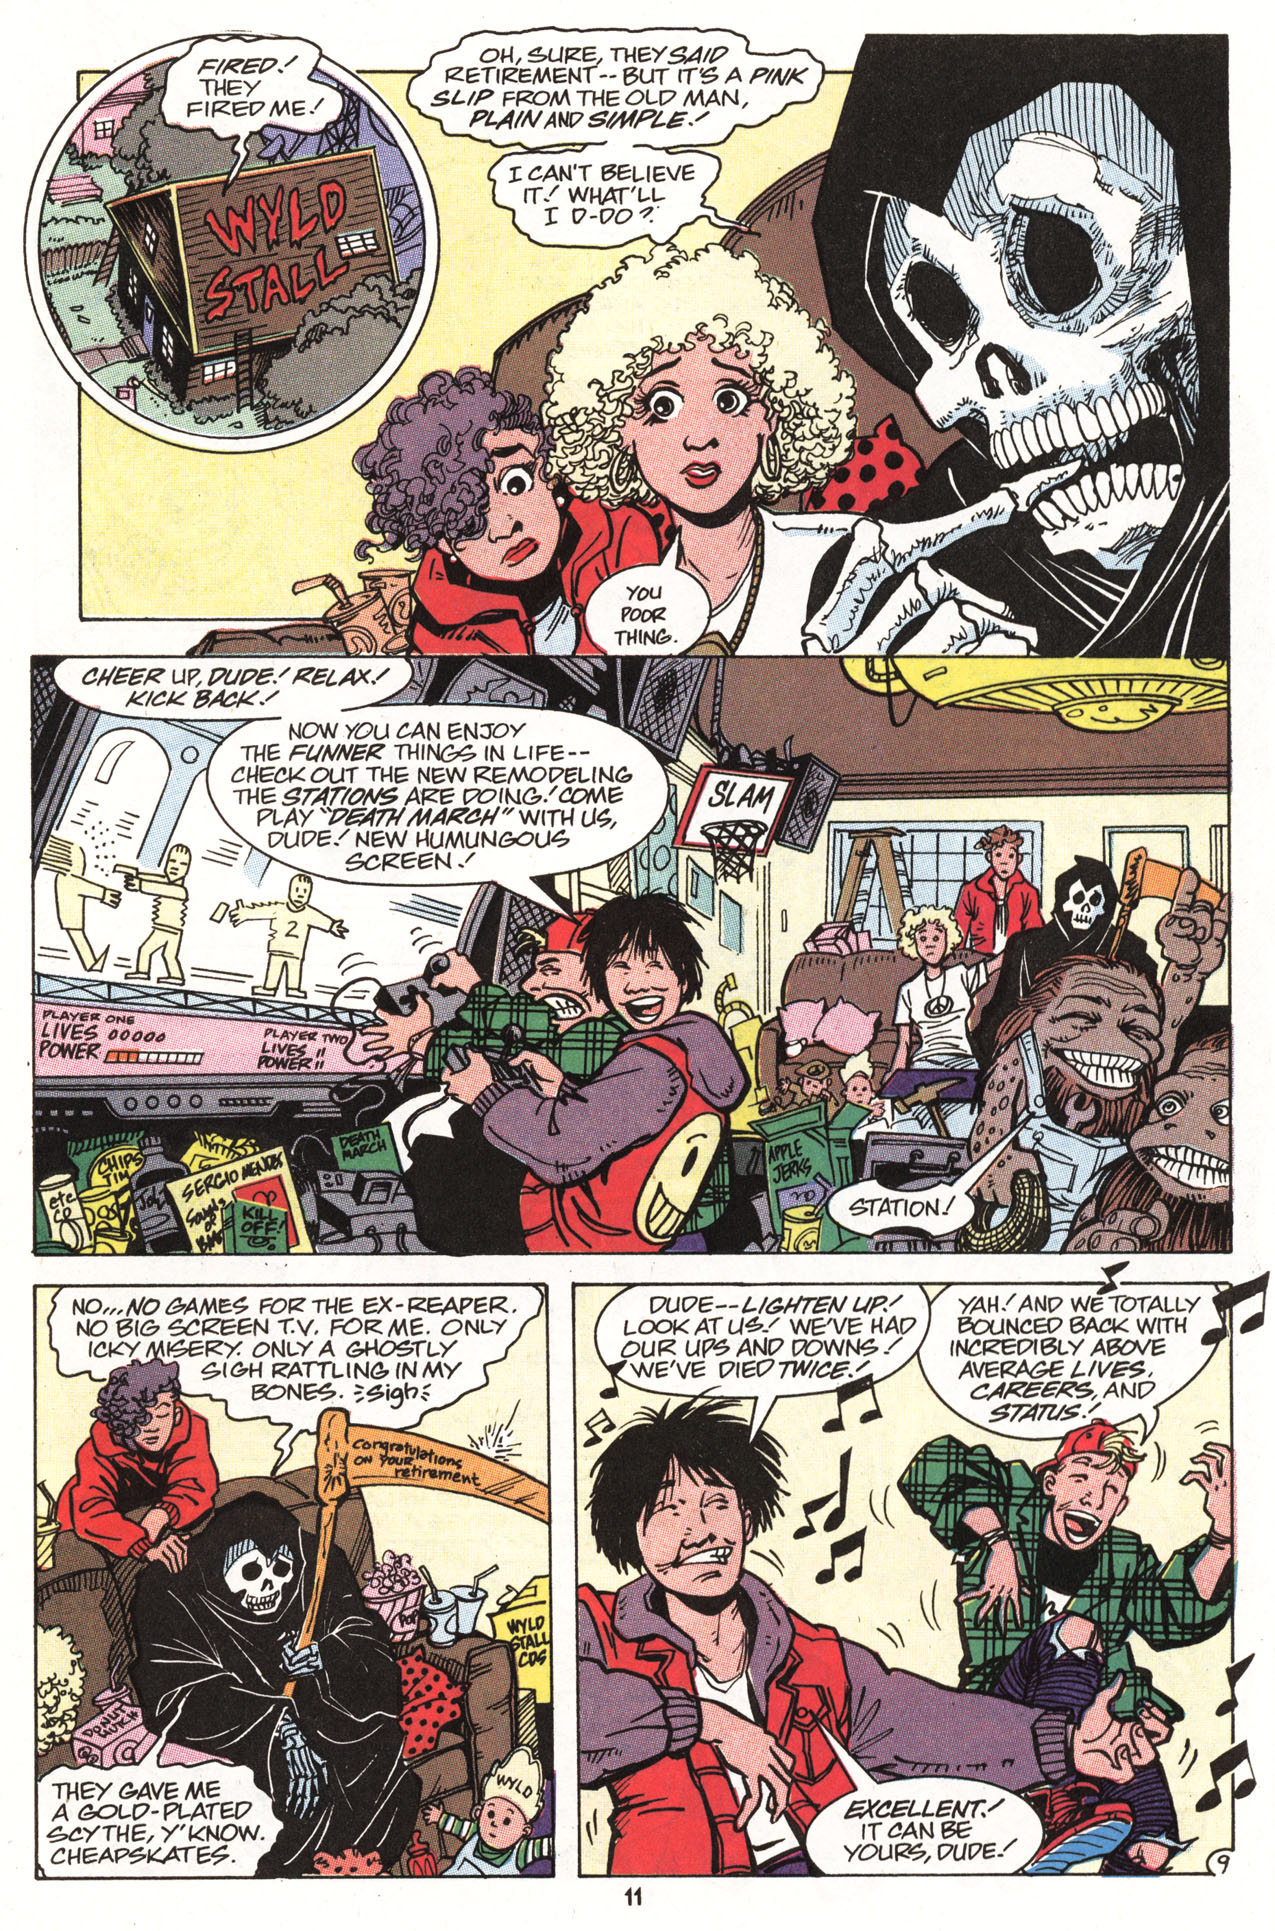 Read online Bill & Ted's Excellent Comic Book comic -  Issue #9 - 13